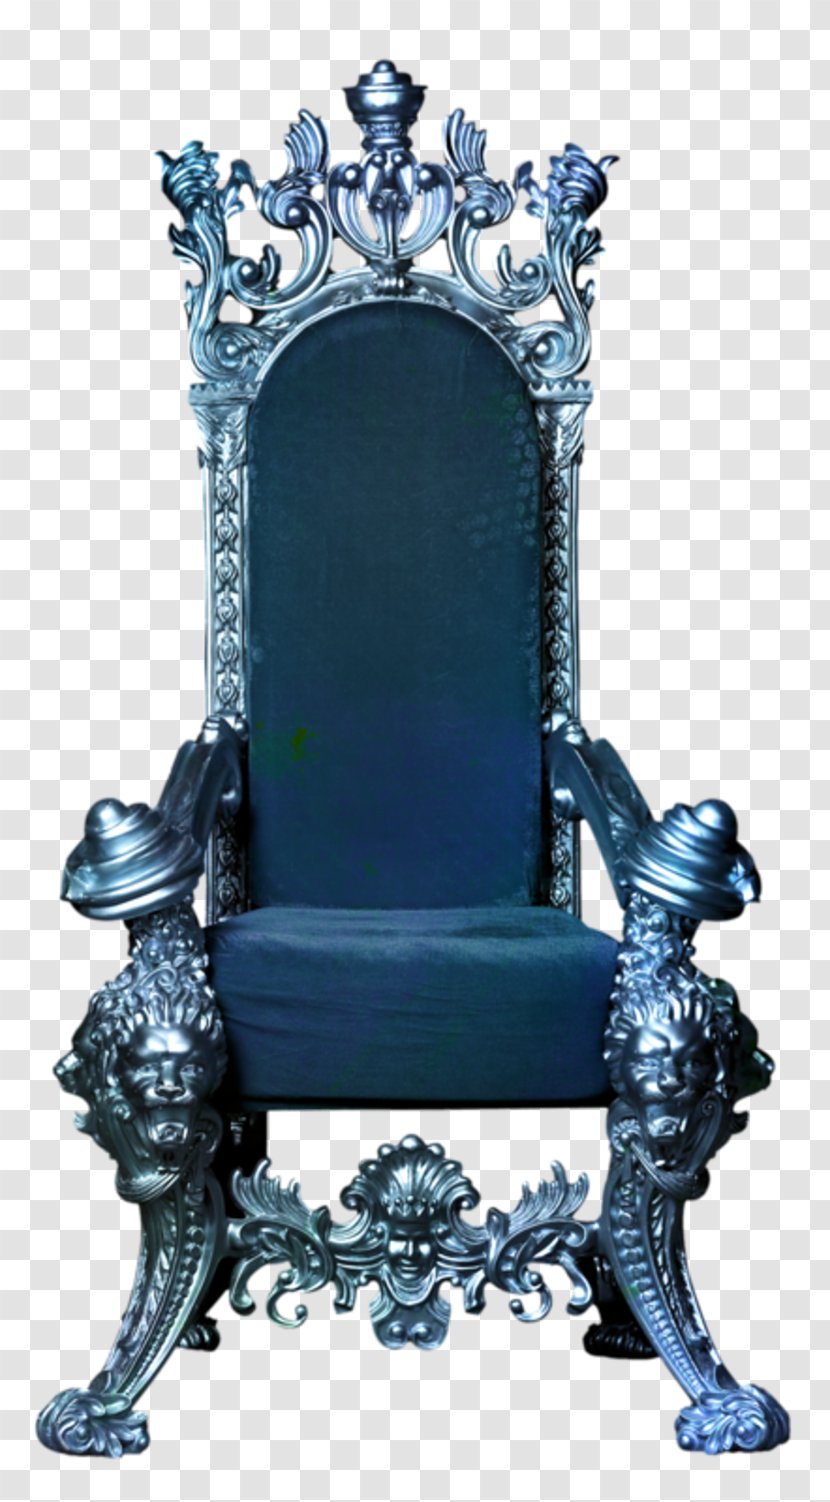 Throne Royalty-free Chair Clip Art - King - Armchair Transparent PNG